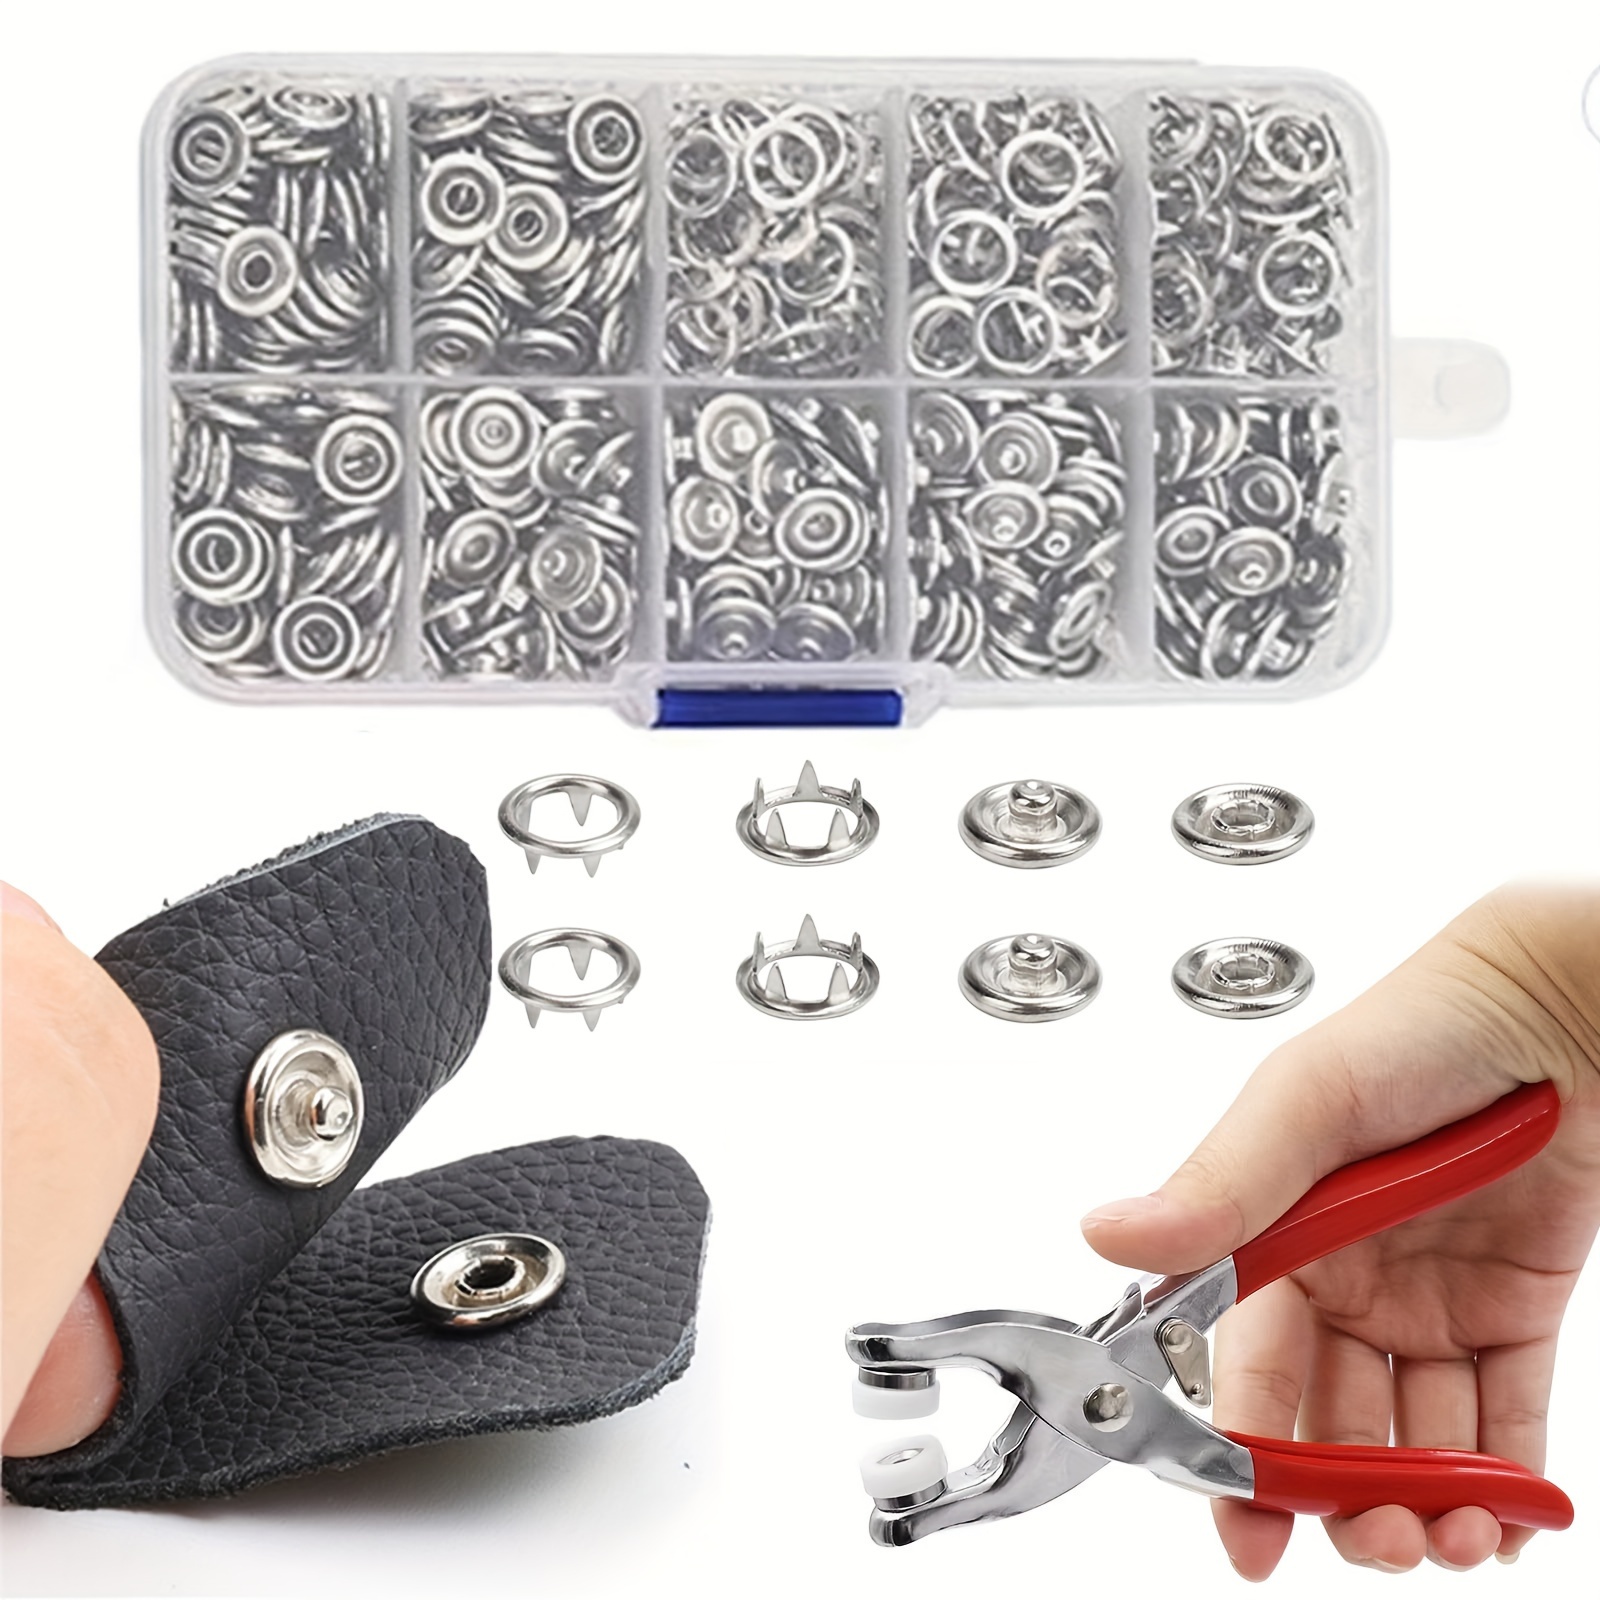 

800pcs Metal Snaps Buttons, Fastener Pliers Press Tool Kit With 200 Sets 3/8 Inch Snaps, Prong Metal Snaps, Stainless Steel Snap Installation Tool For Diy Crafting, Clothing (9.5mm/silver)